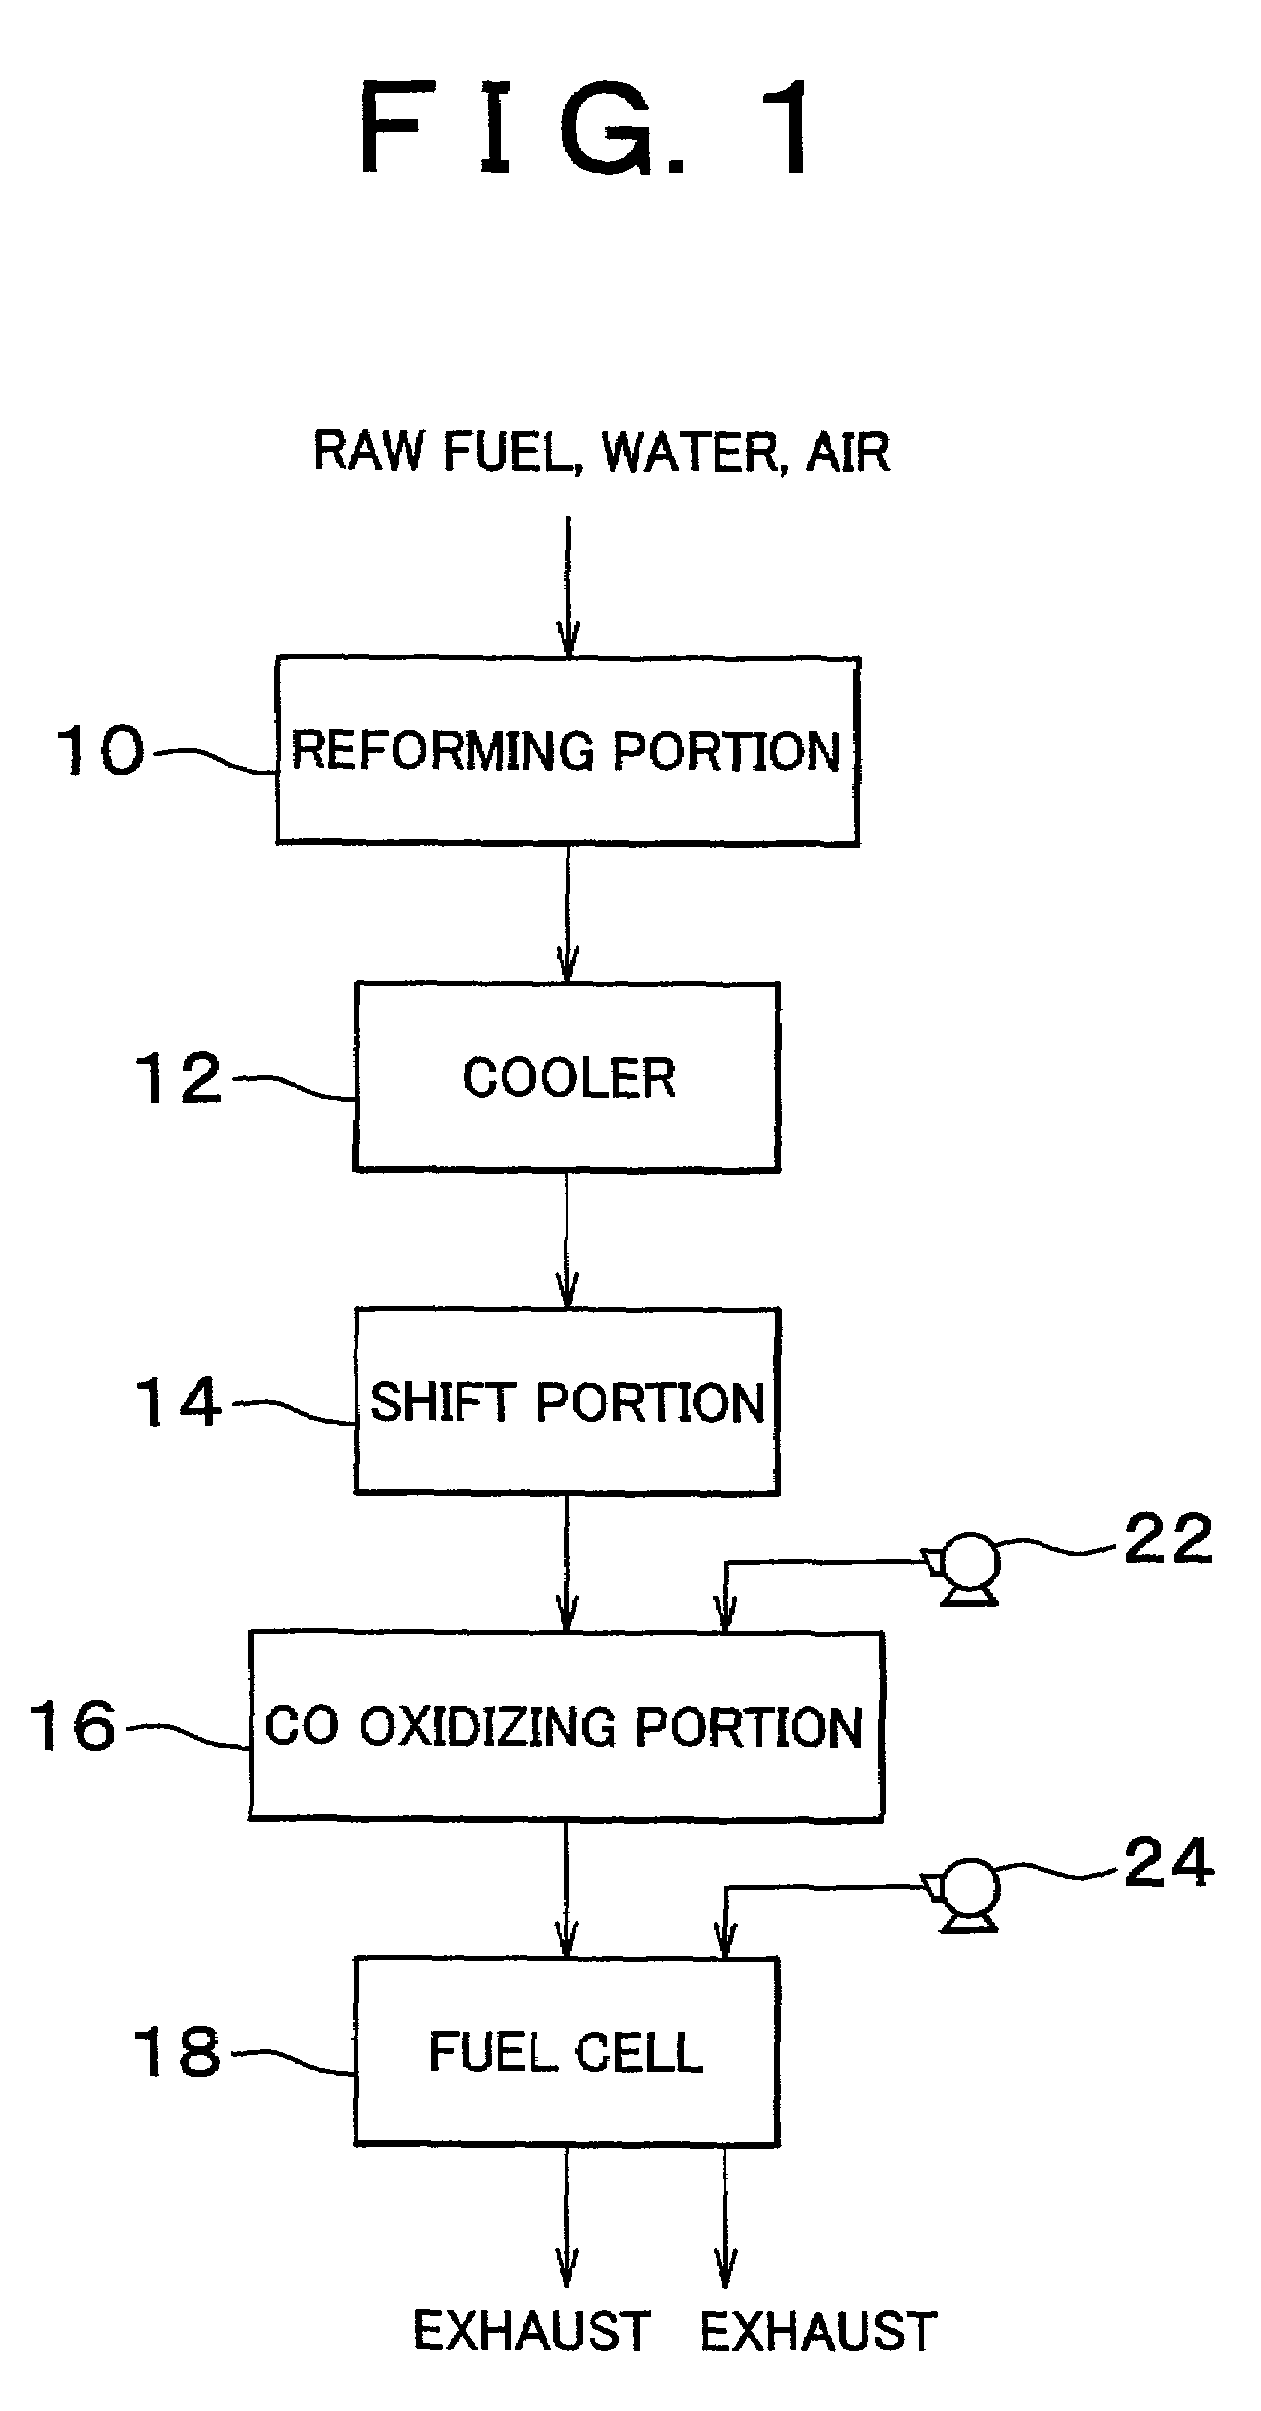 Carbon monoxide selective oxidizing catalyst and manufacturing method for the same